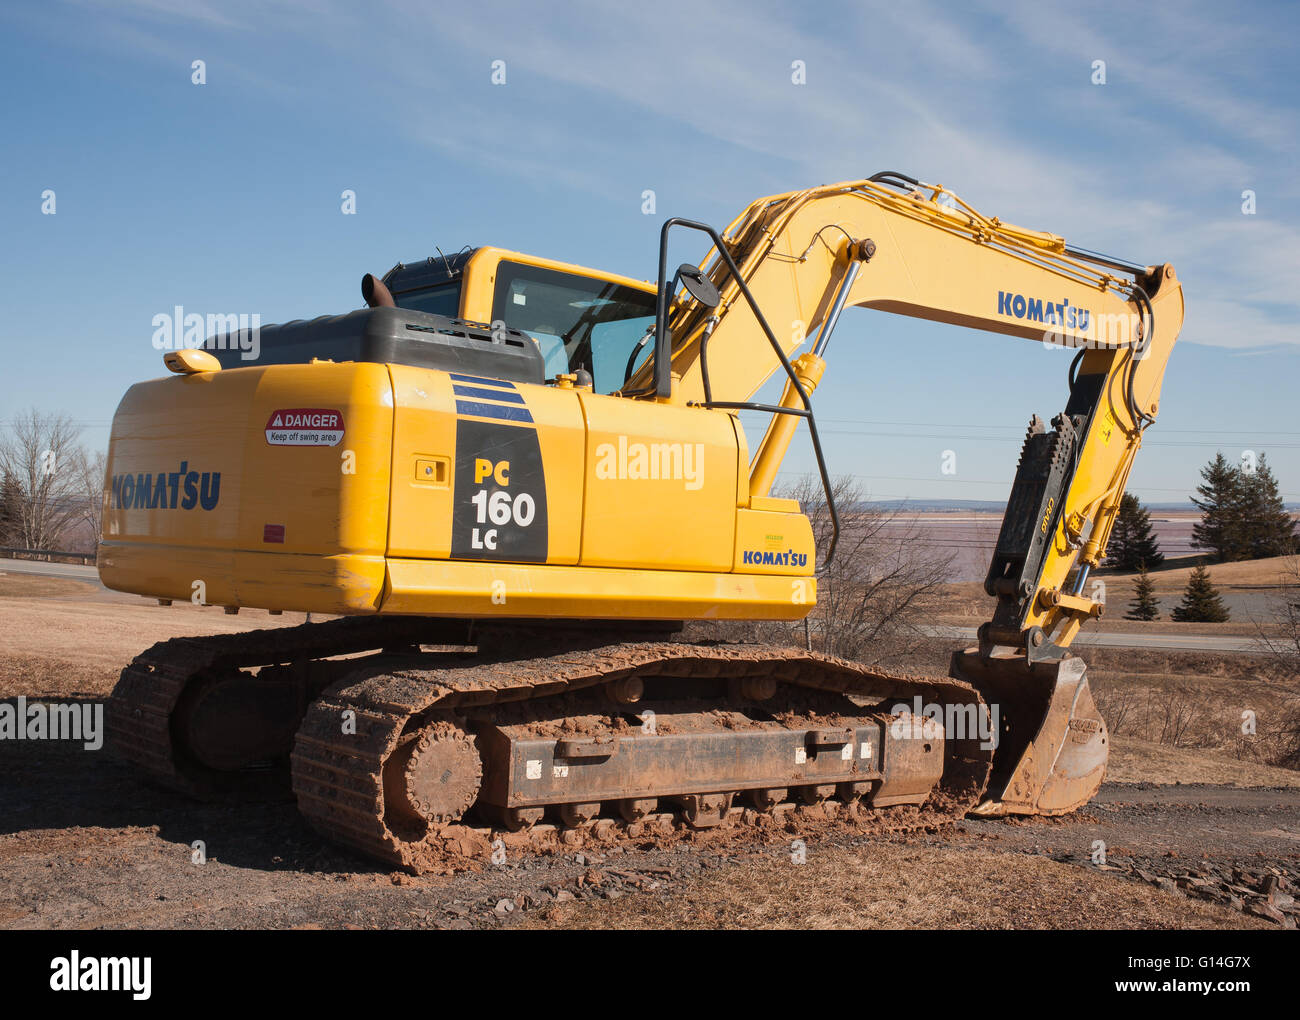 MAITLAND, CANADA - MARCH 04, 2016: Komatsu is a Japanese corporation manufacturing heavy, industrial and military equipment. Stock Photo